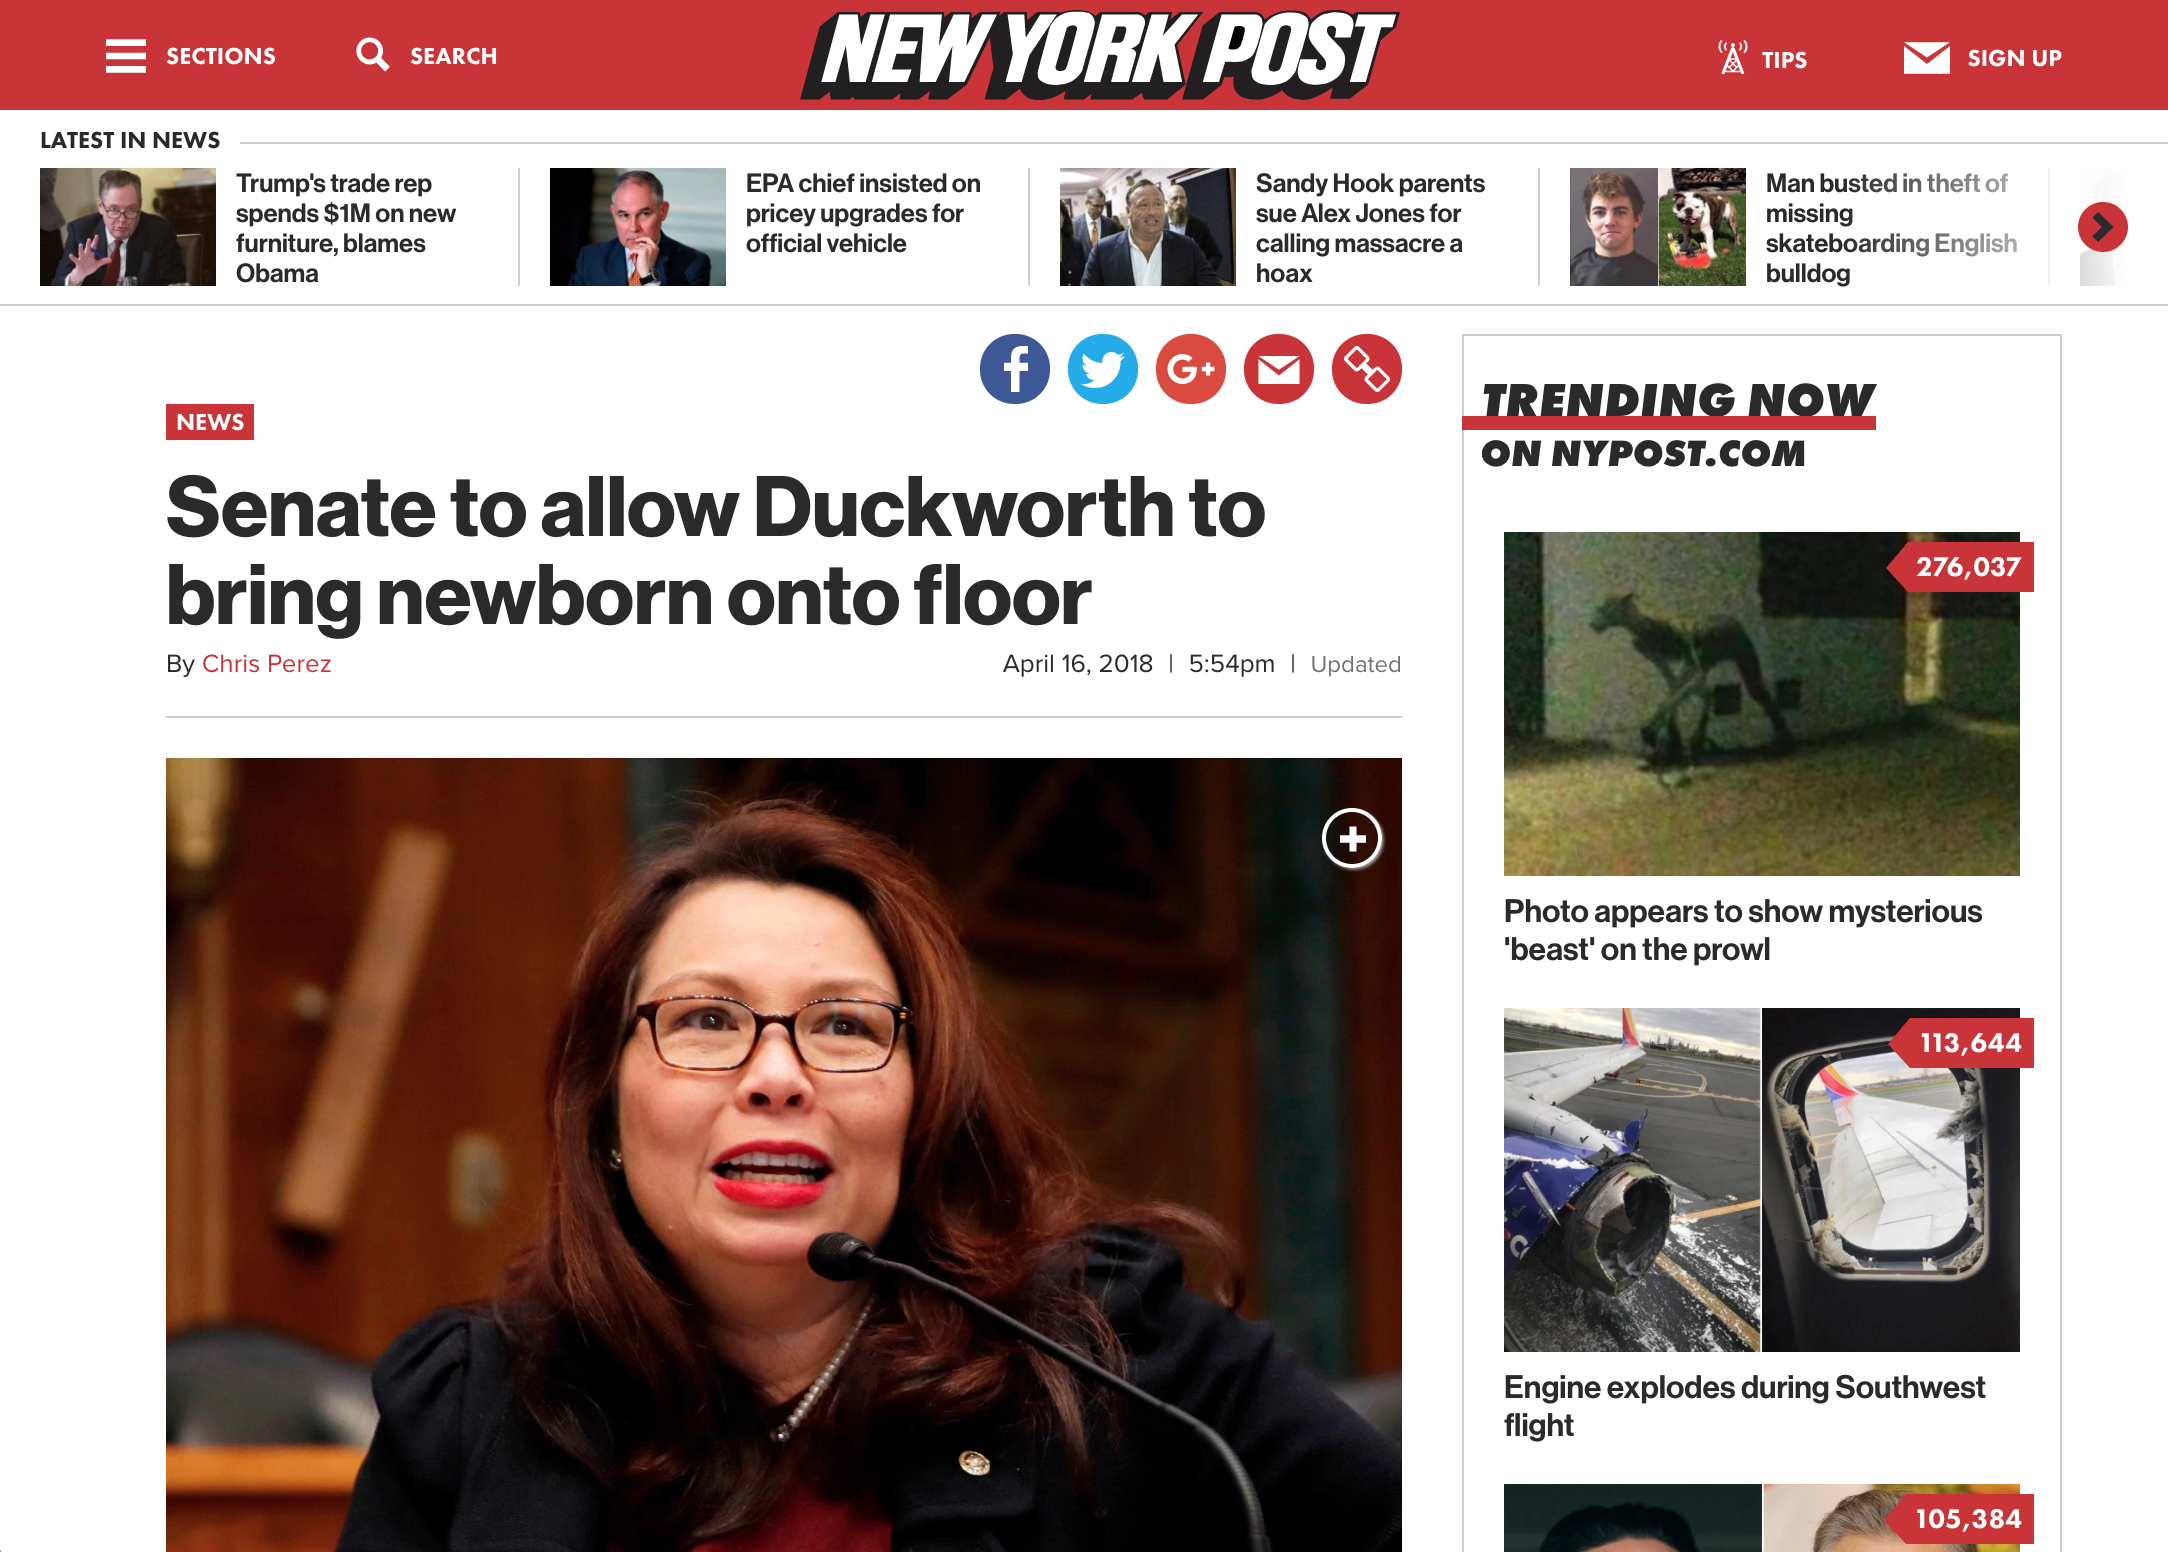 The main page of the New York Post with navigation, featured article, and additional content